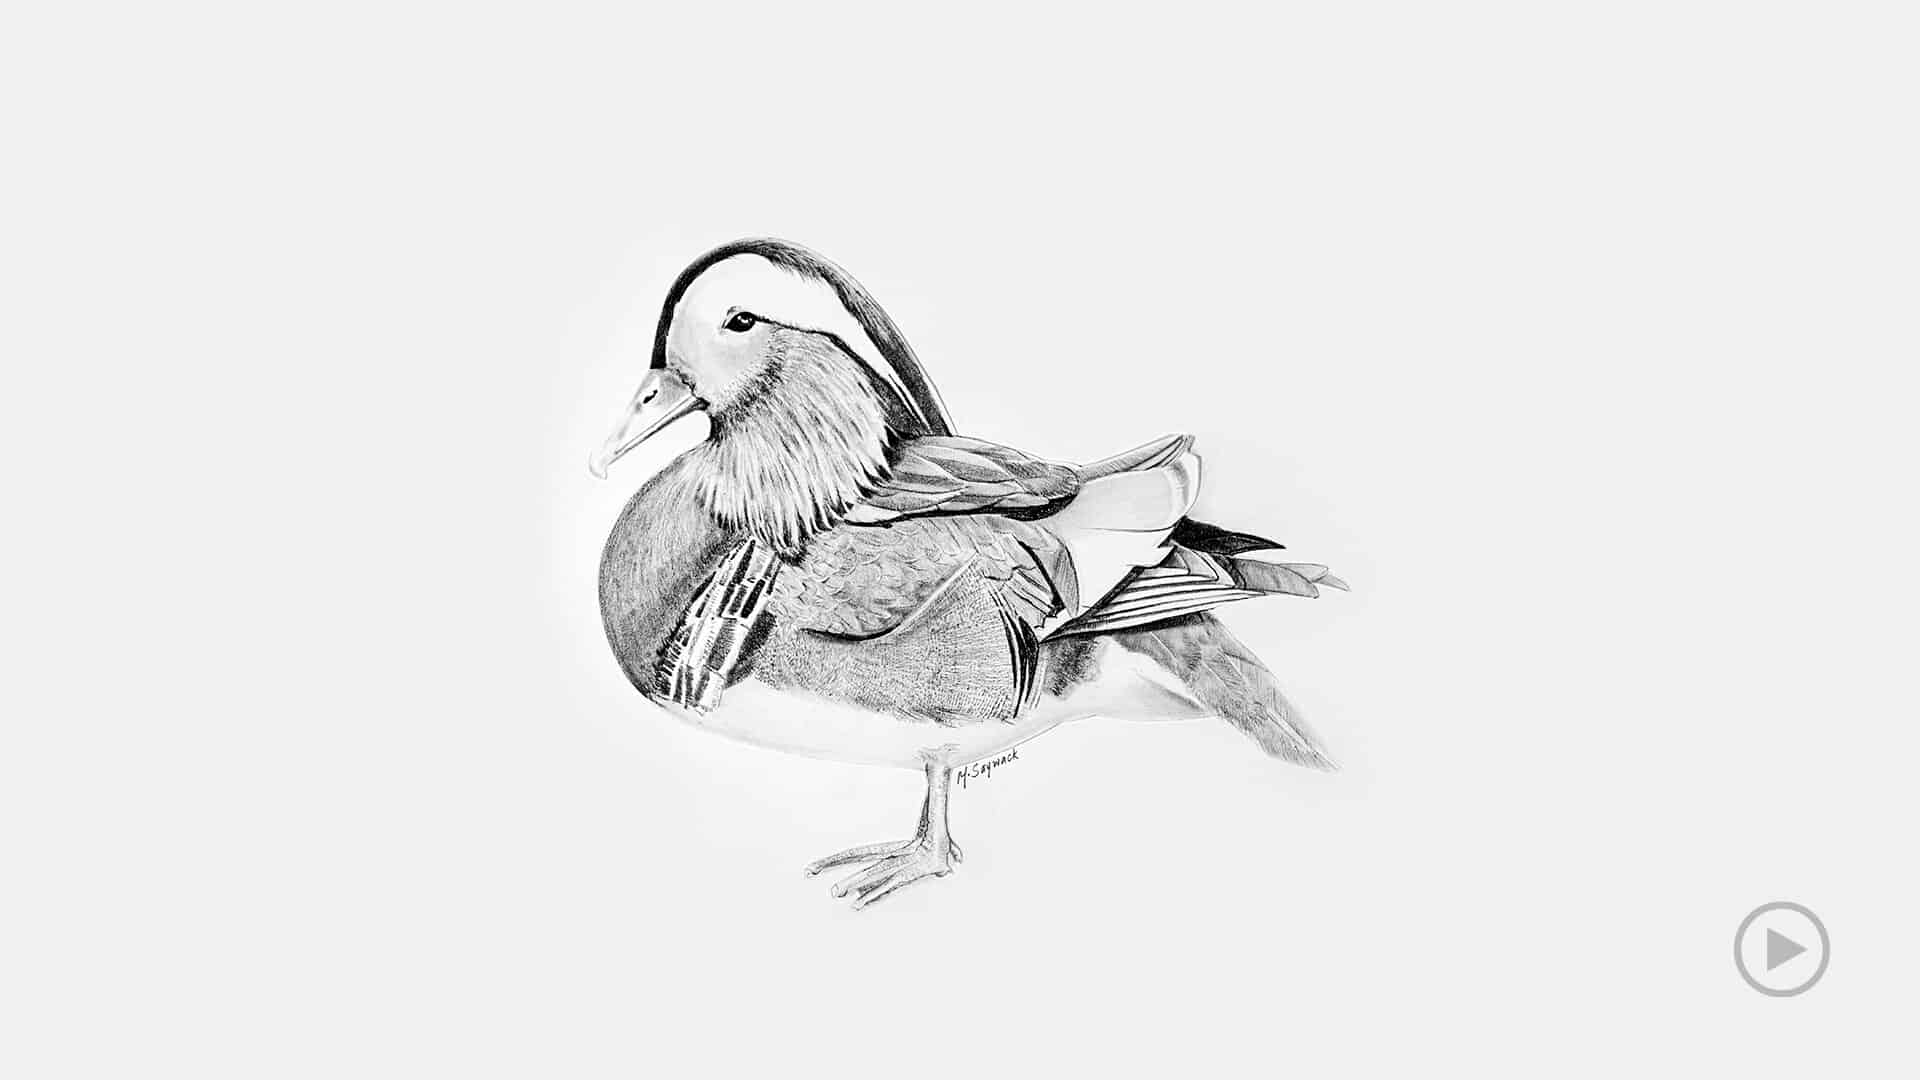 Time-lapse pencil drawing video of a mandarin duck.